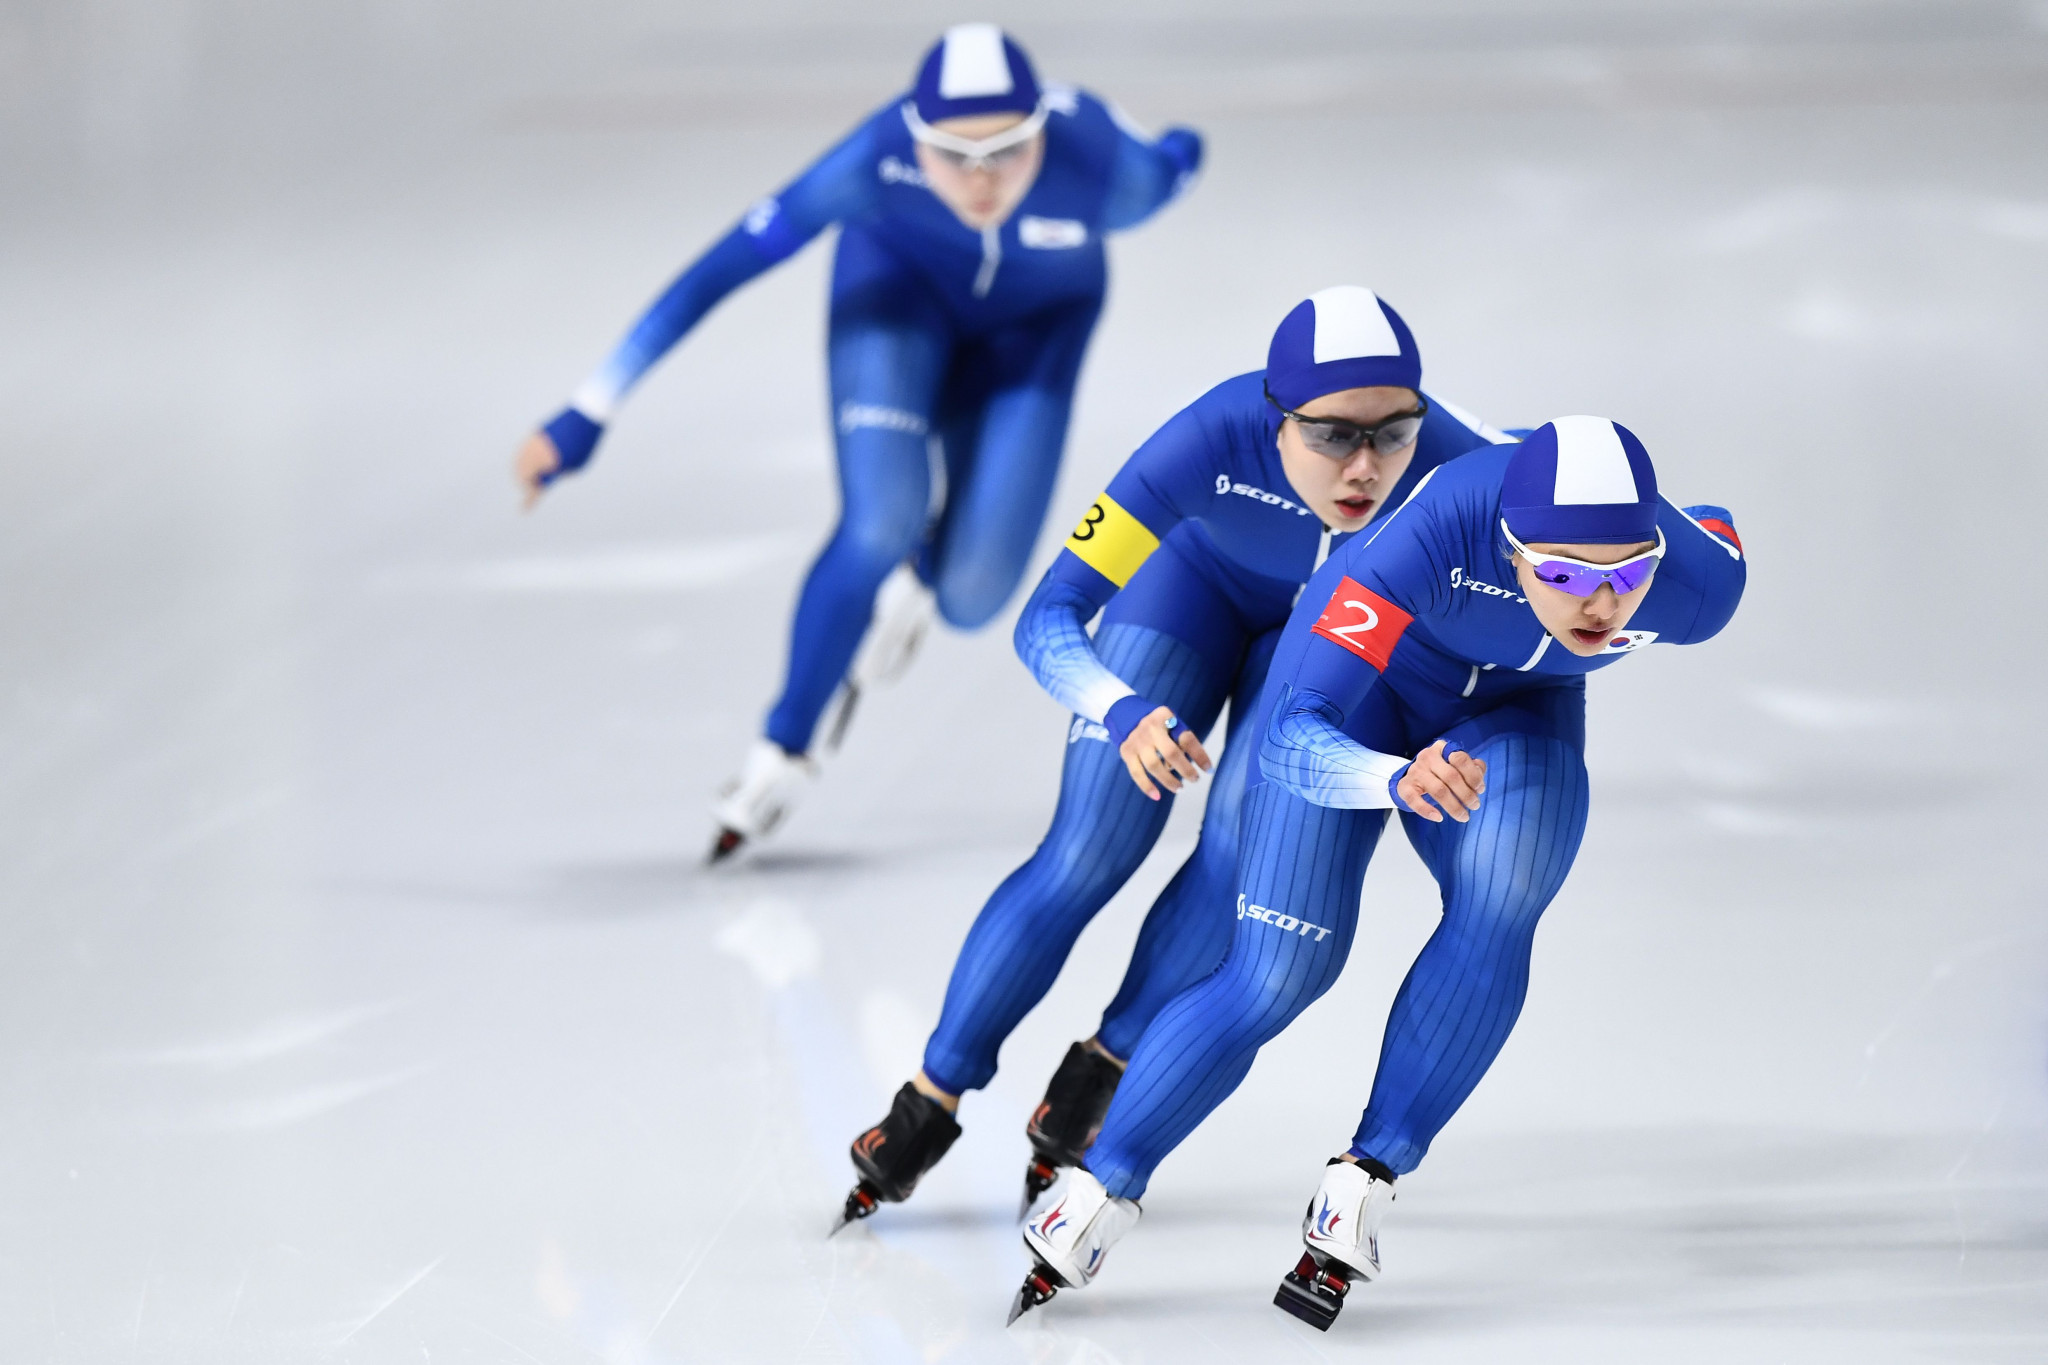 Noh Seon-yeong finished almost four seconds behind her two team-mates during the event ©Getty Images